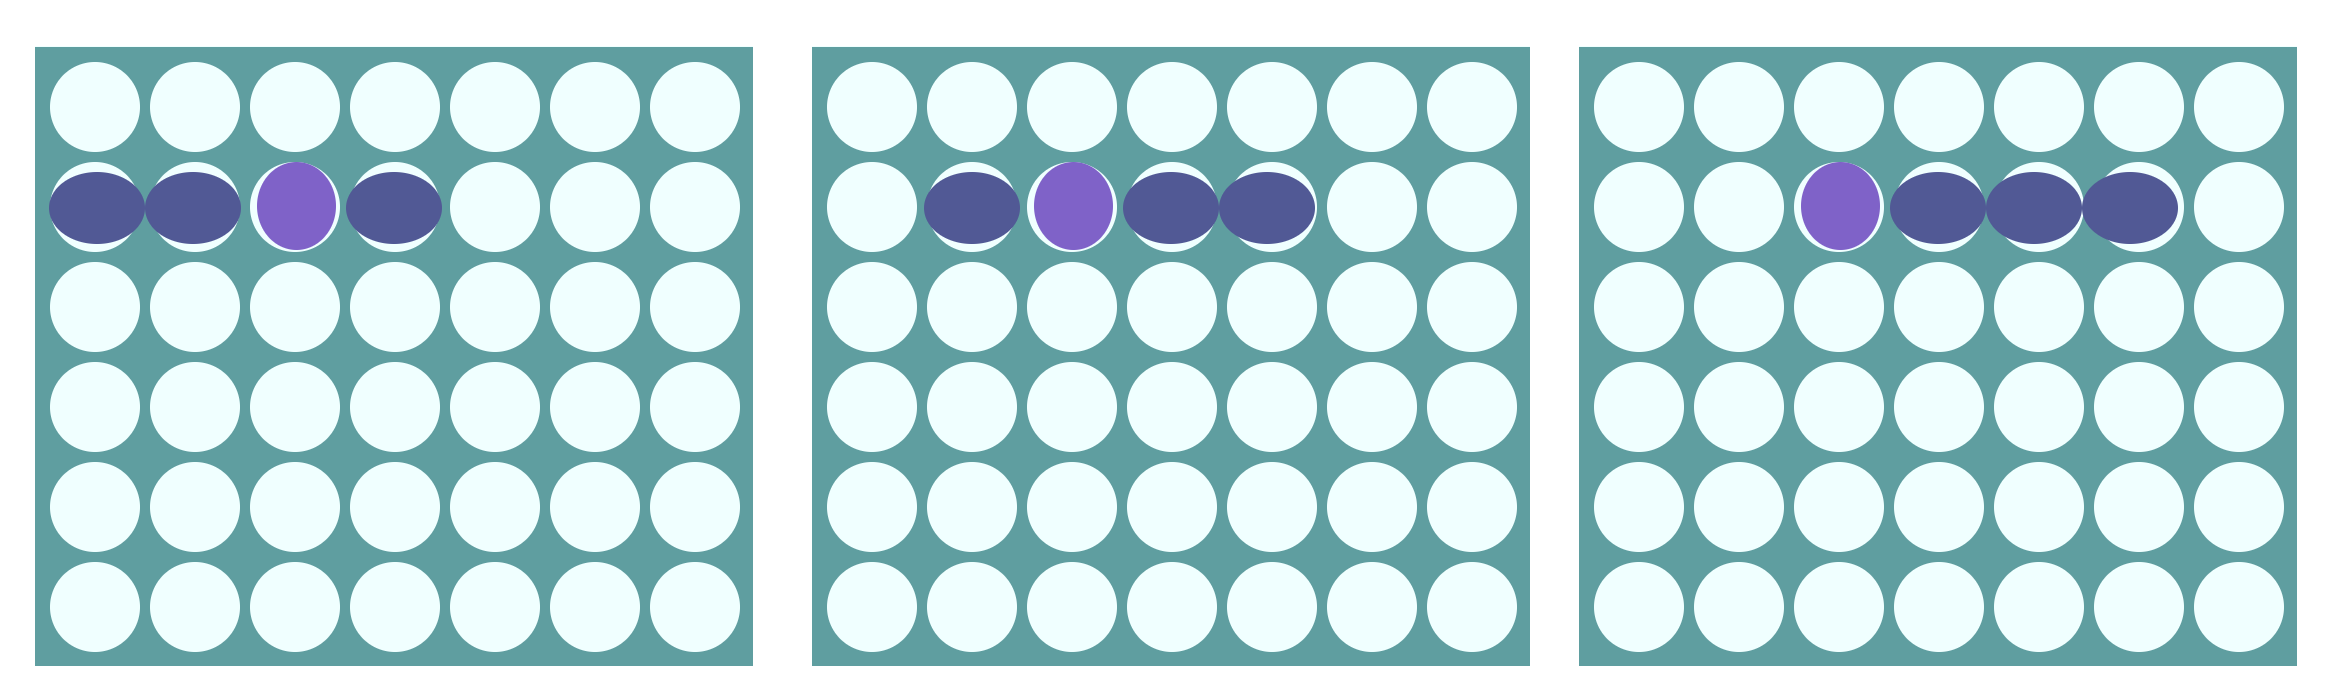 Possible winning combinations for horizontal check